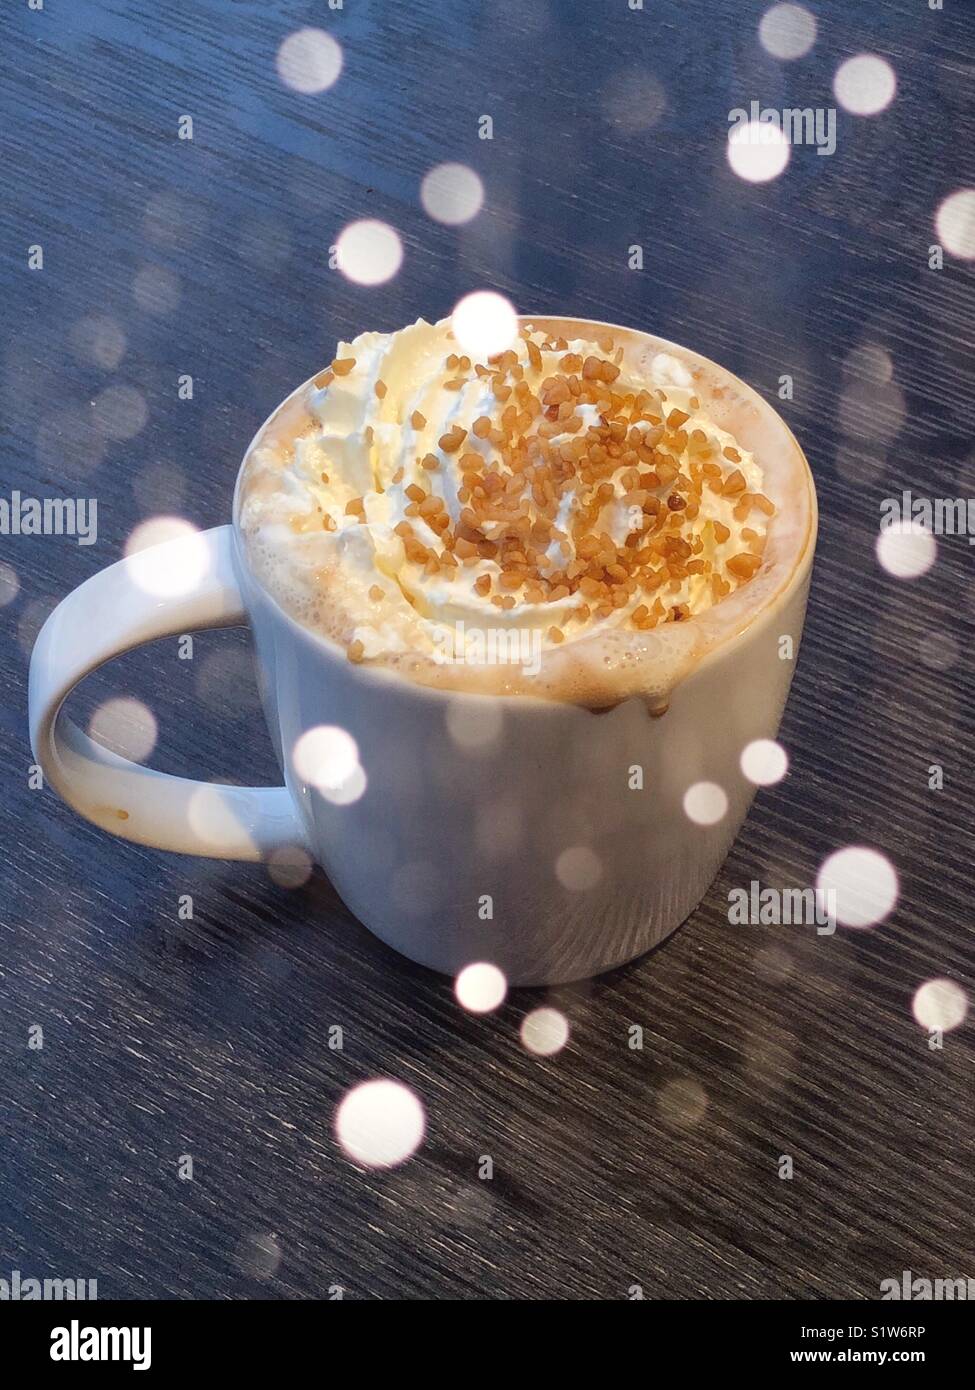 Toffee nut latte with nuts and cream in white mug with light bokeh flares  Stock Photo - Alamy